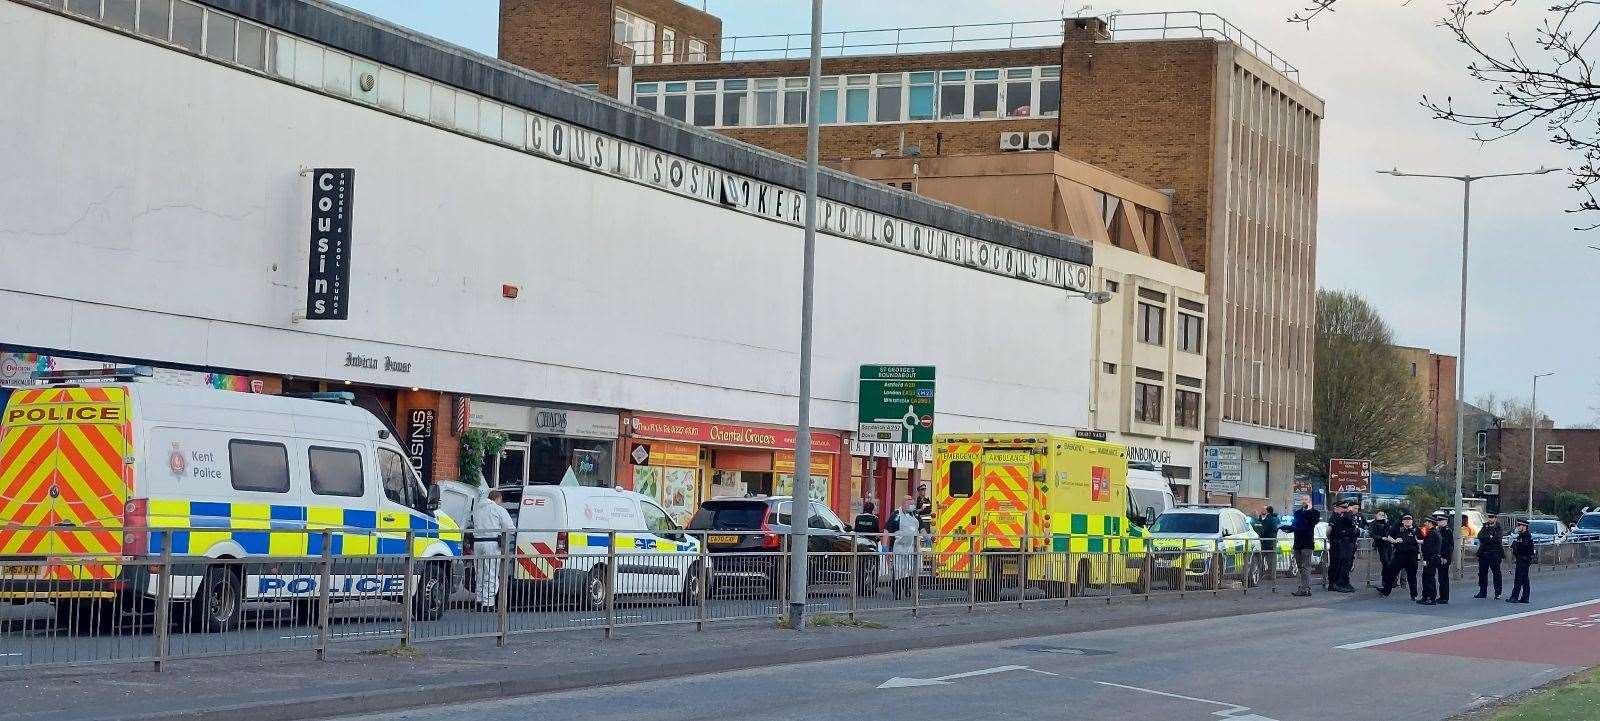 Emergency services descended on GothInk Studios tattoo parlous on Monday evening